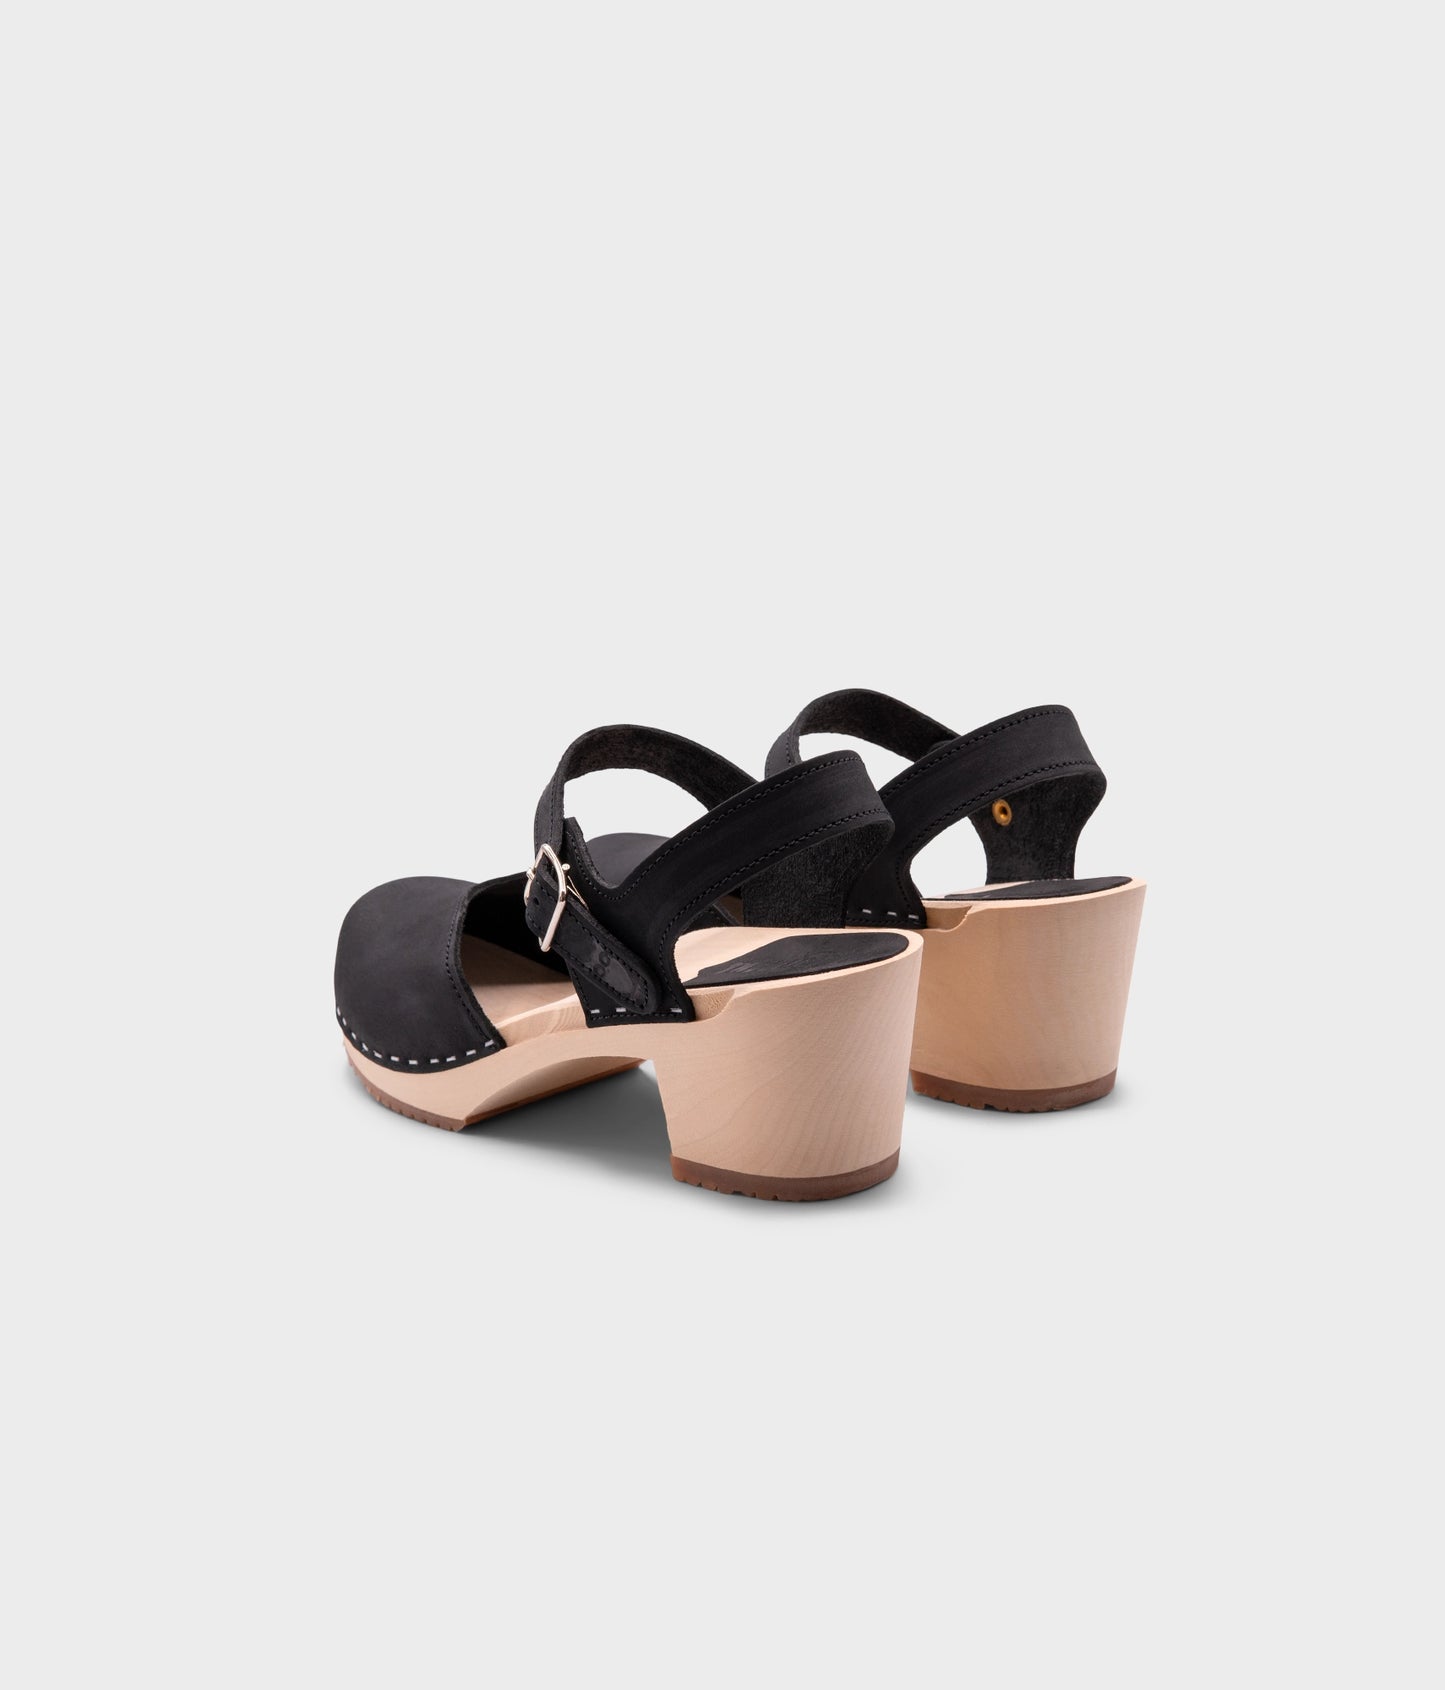 high heeled closed-toe clog sandal in black nubuck leather stapled on a light wooden base